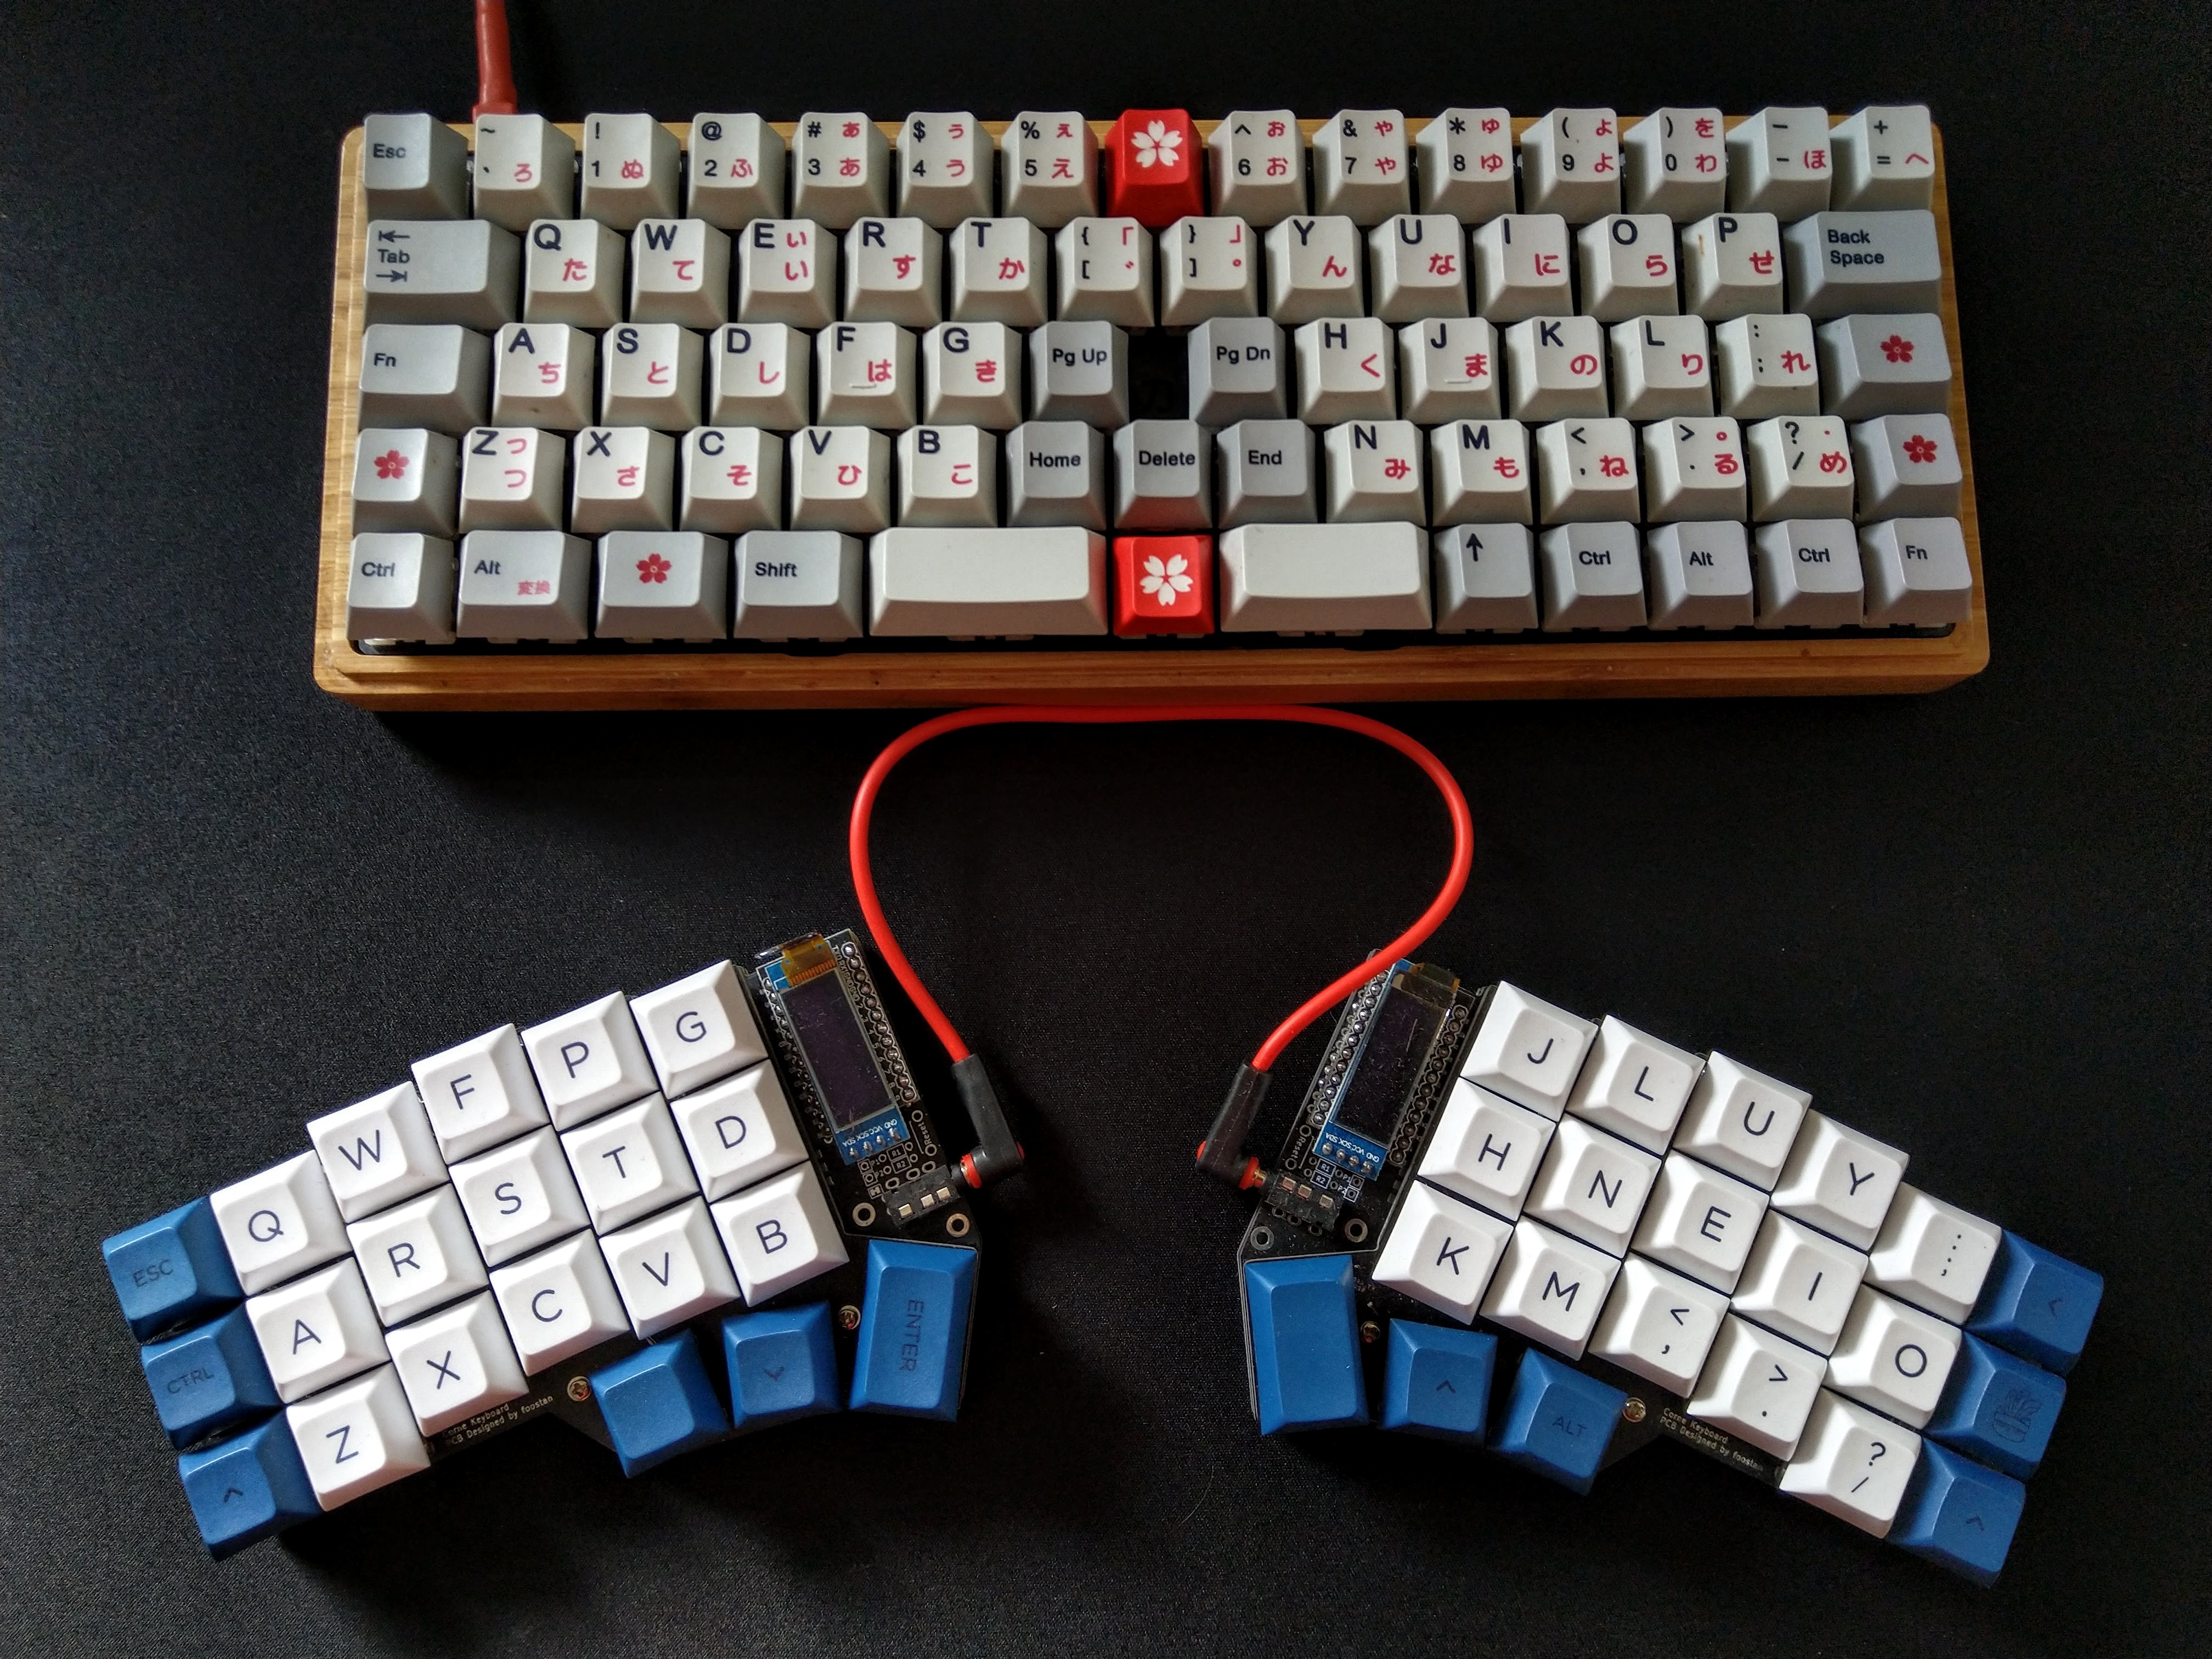 Katana60 and The Corne keyboard next to each other.